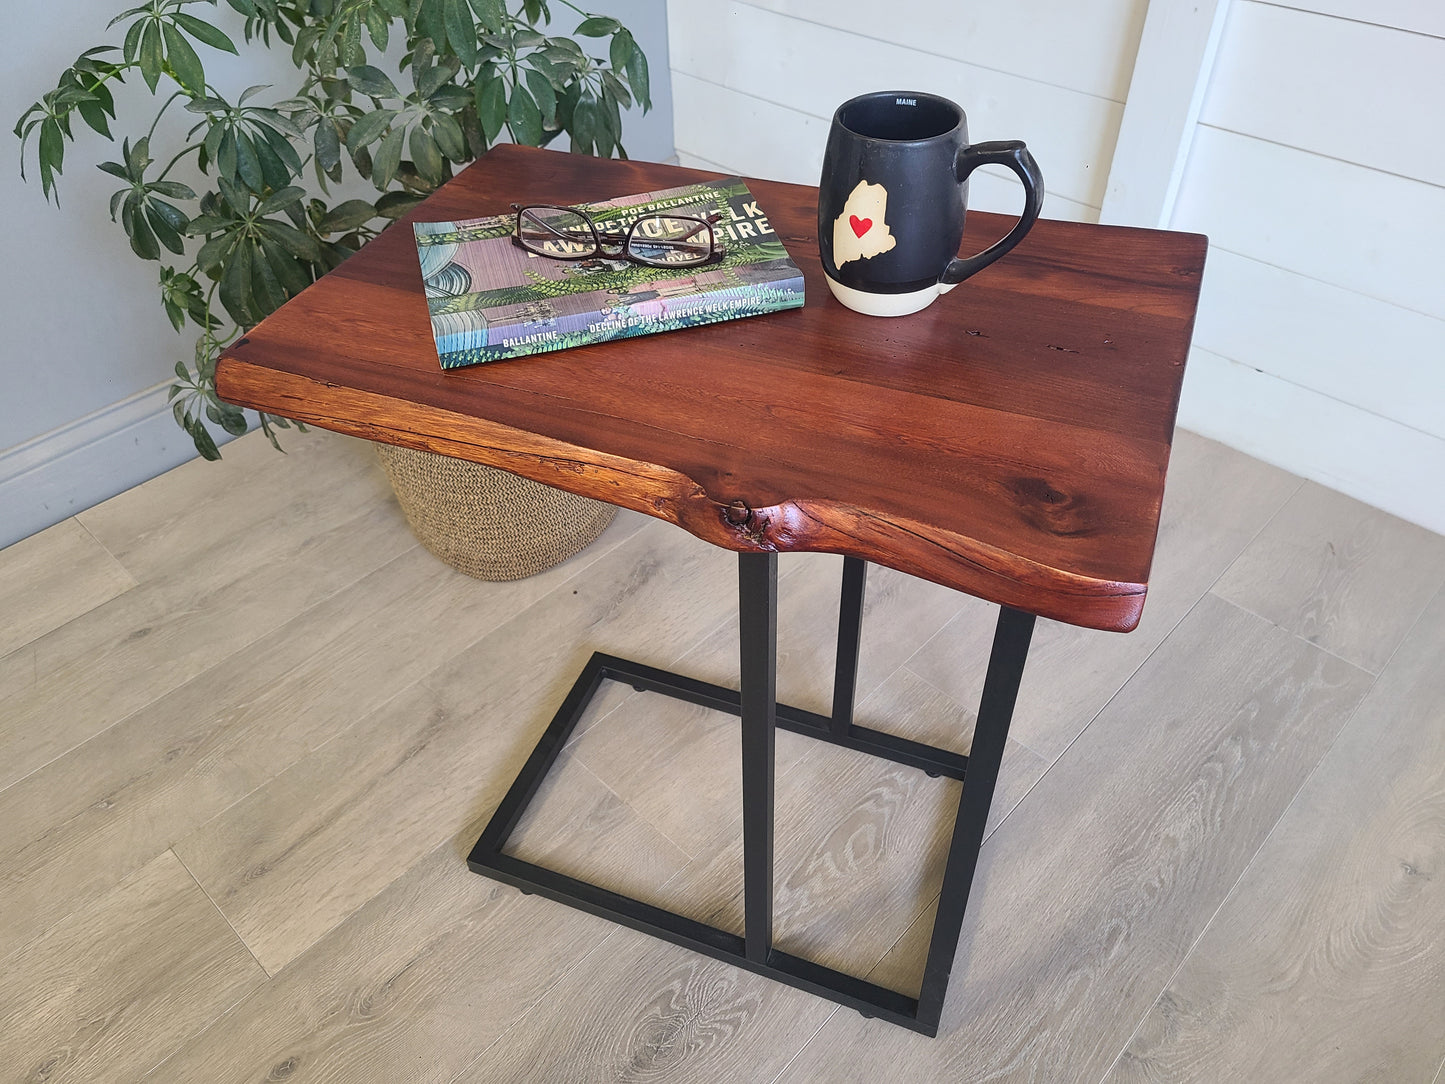 C-Table with live edge, Laptop stand, Reclaimed Wood Side Table, TV tray table, Choose Your Finish